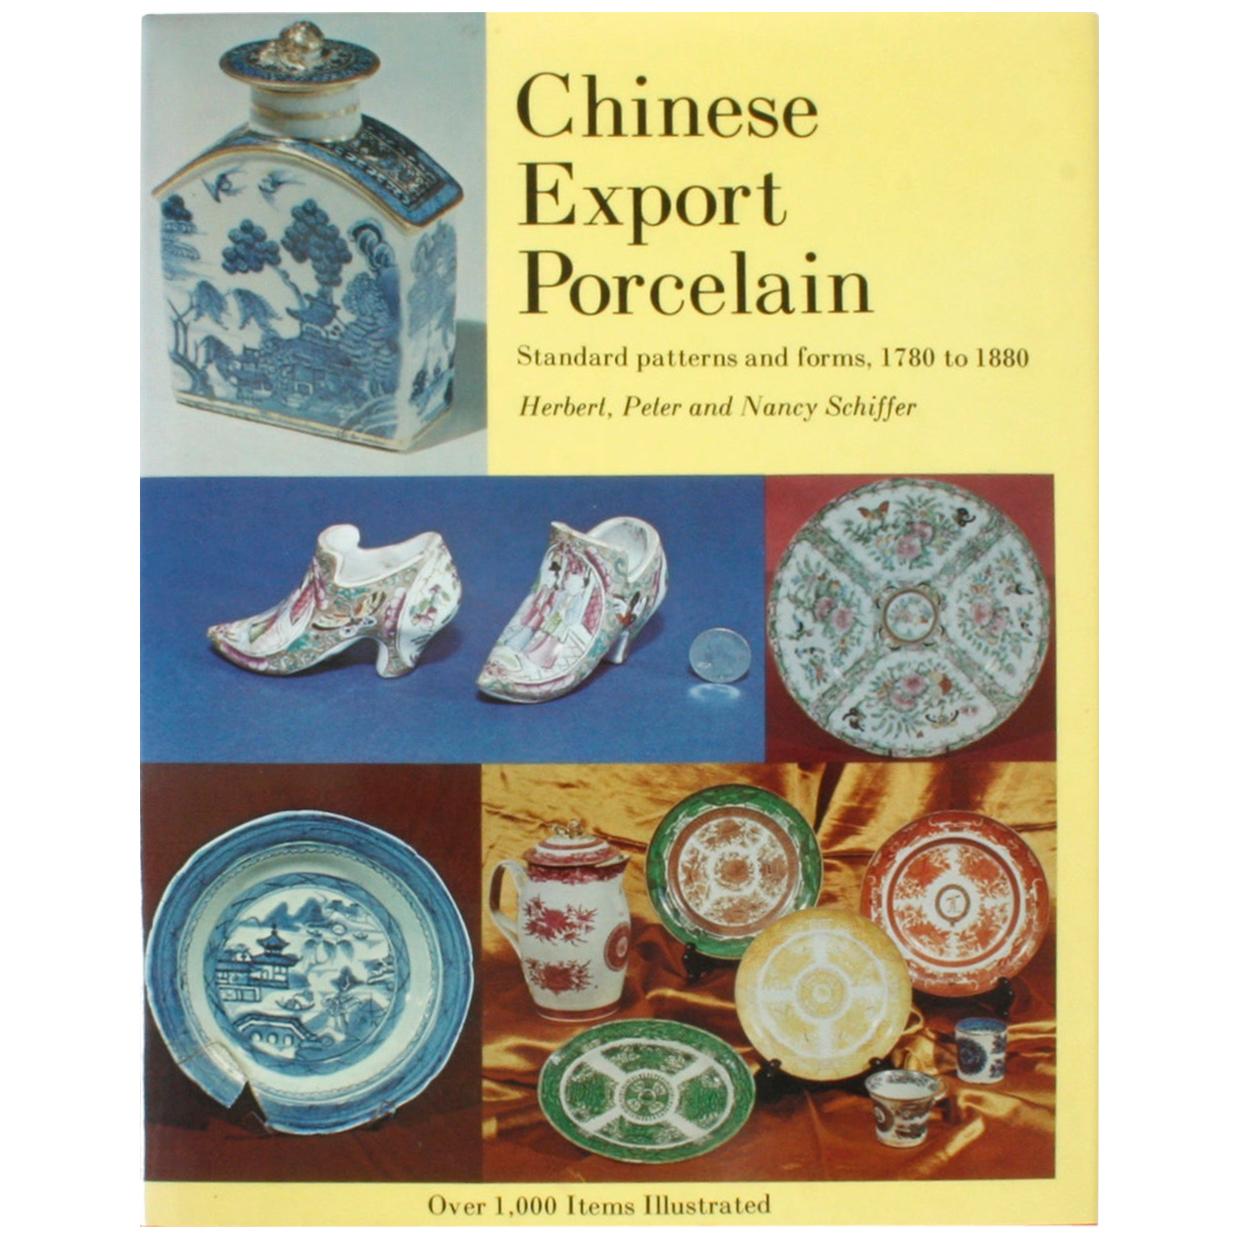 Chinese Export Porcelain, Standard Patterns and Forms, 1780-1880, First Edition